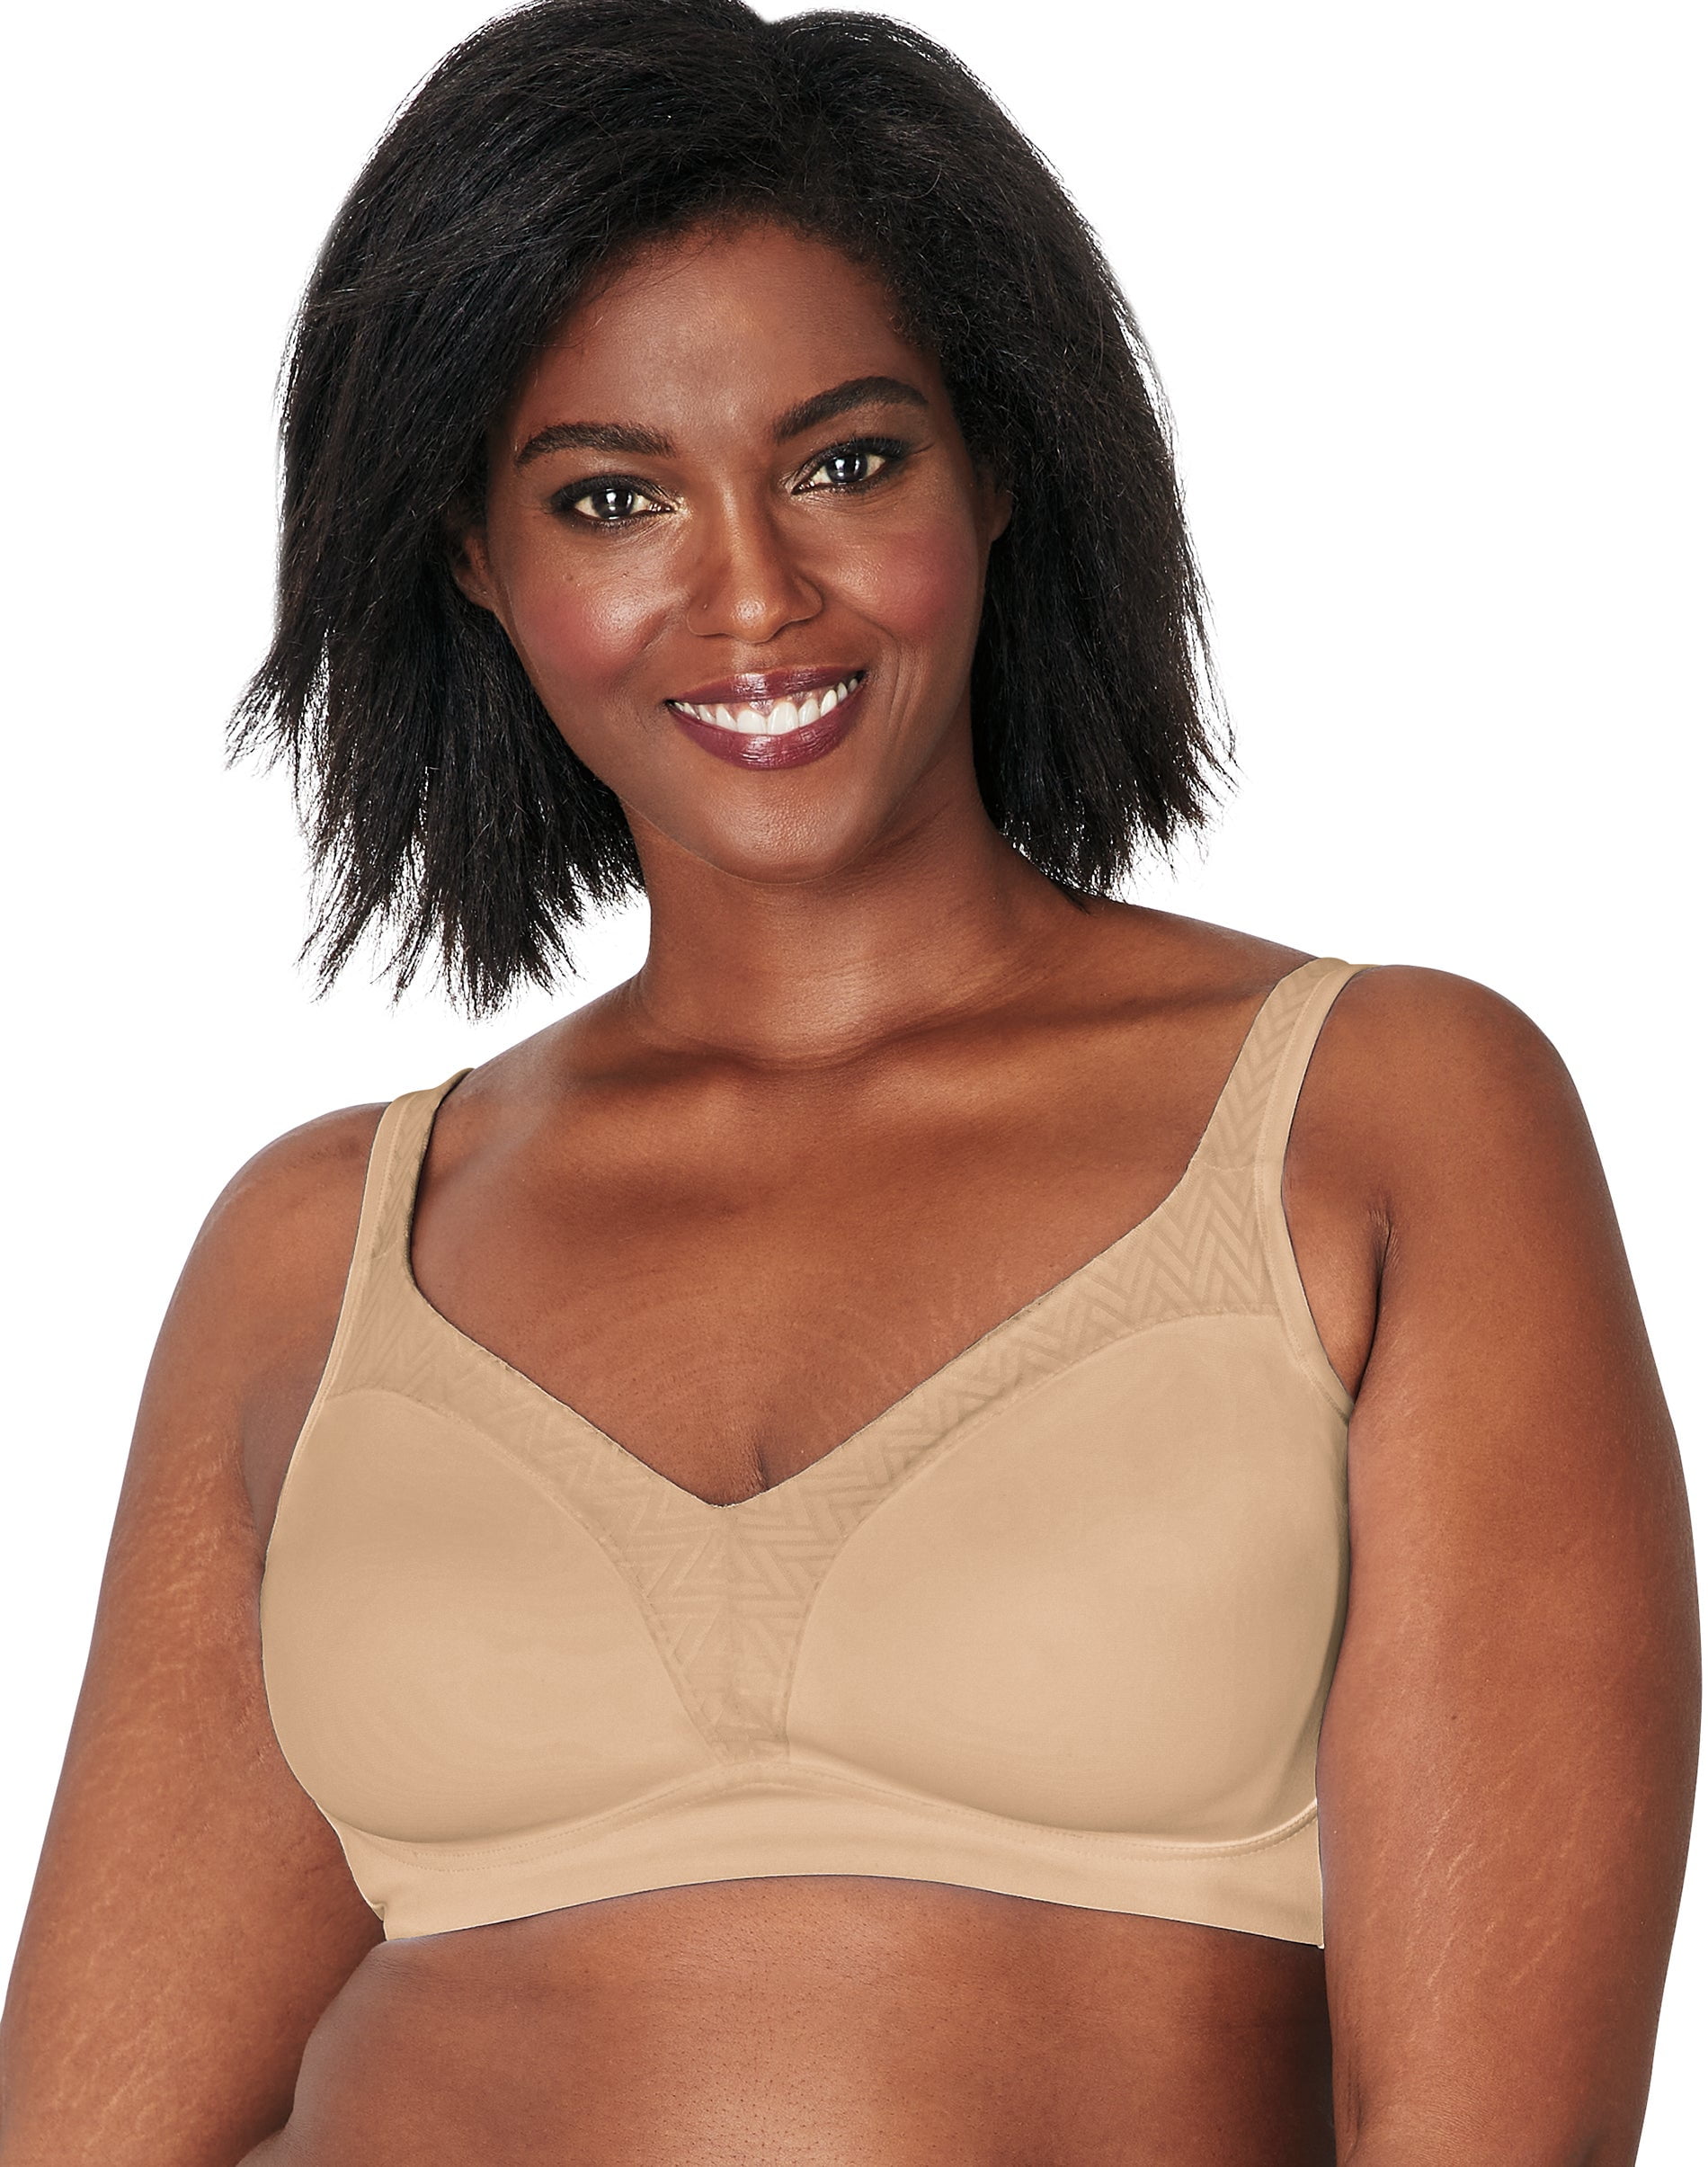 Women's Playtex US4699 18 Hour Bounce Control Wirefree Bra (Taupe 44C) 